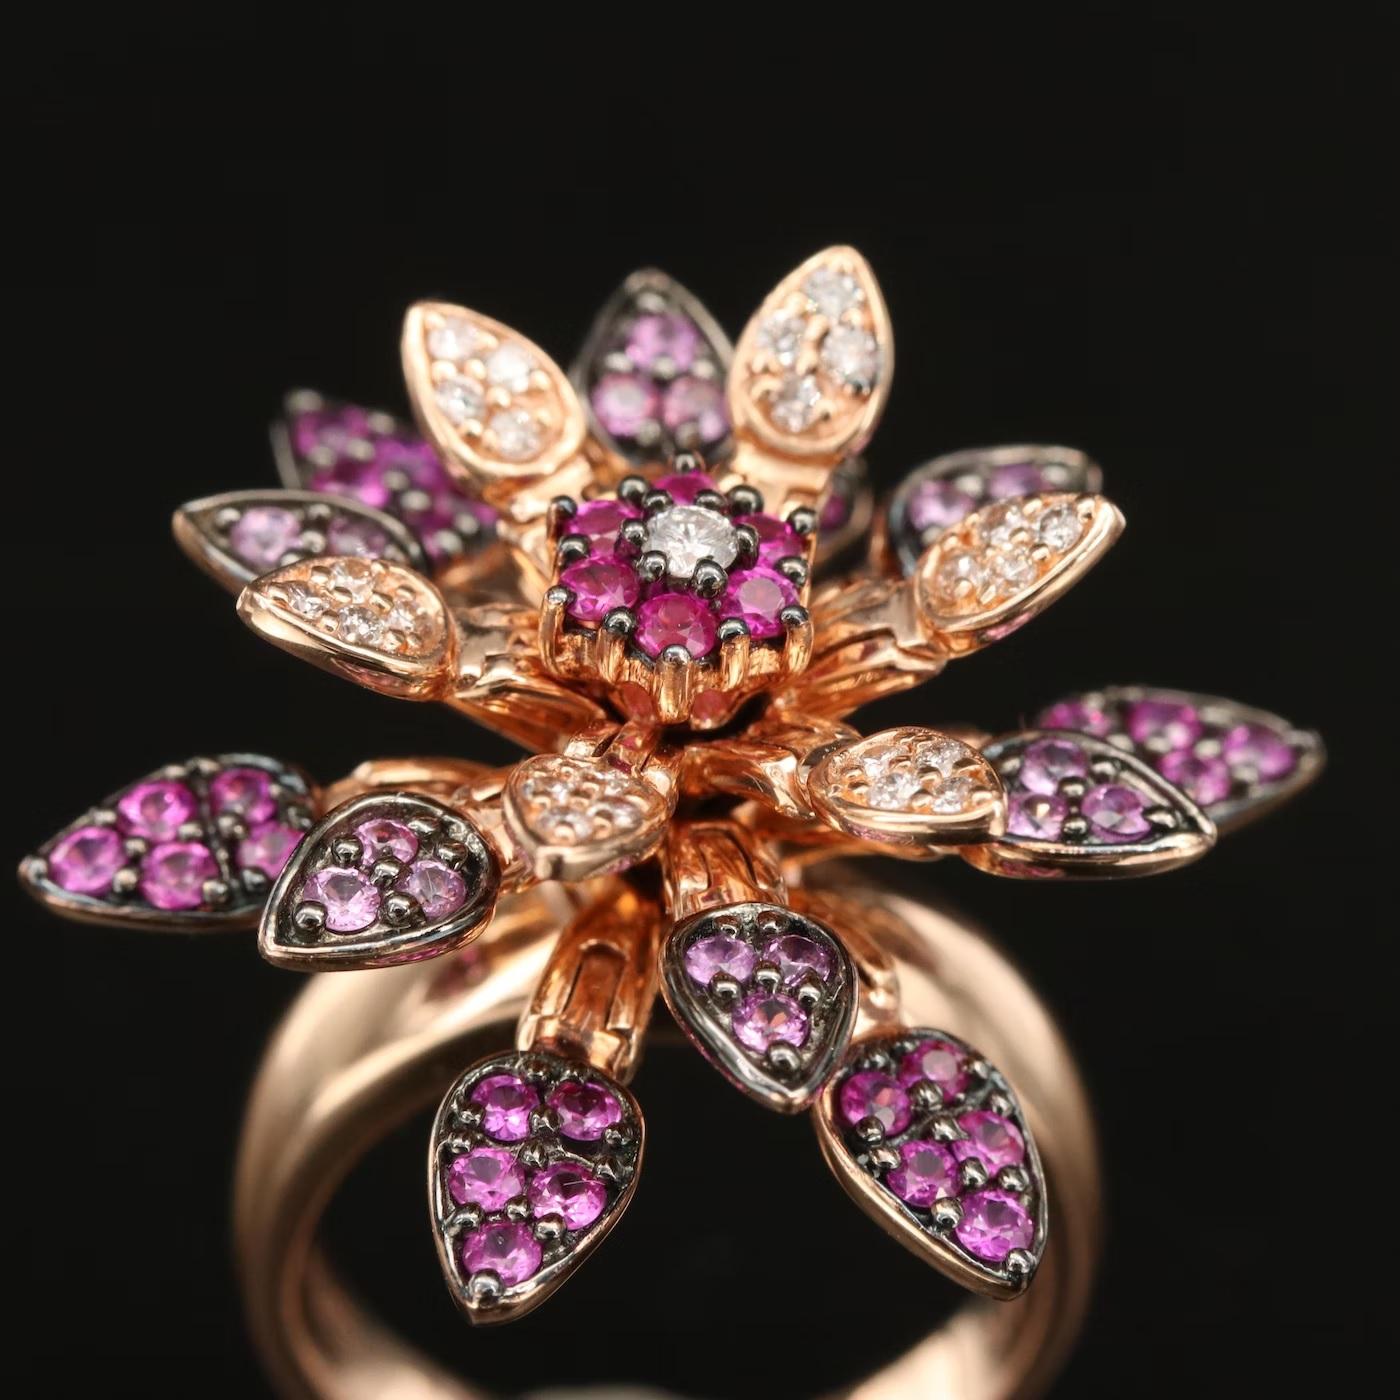 MADE IN THE USA

EFFY Designer ring, stamped and hallmarked EFFY

NEW WITH TAGS, Tag Price $7500

Amazing flower 3D design, mechanical ring, the flower pedals open and close and the flower turns 360 degrees

1.31 CWT diamond, Ruby and Pink Sapphire,